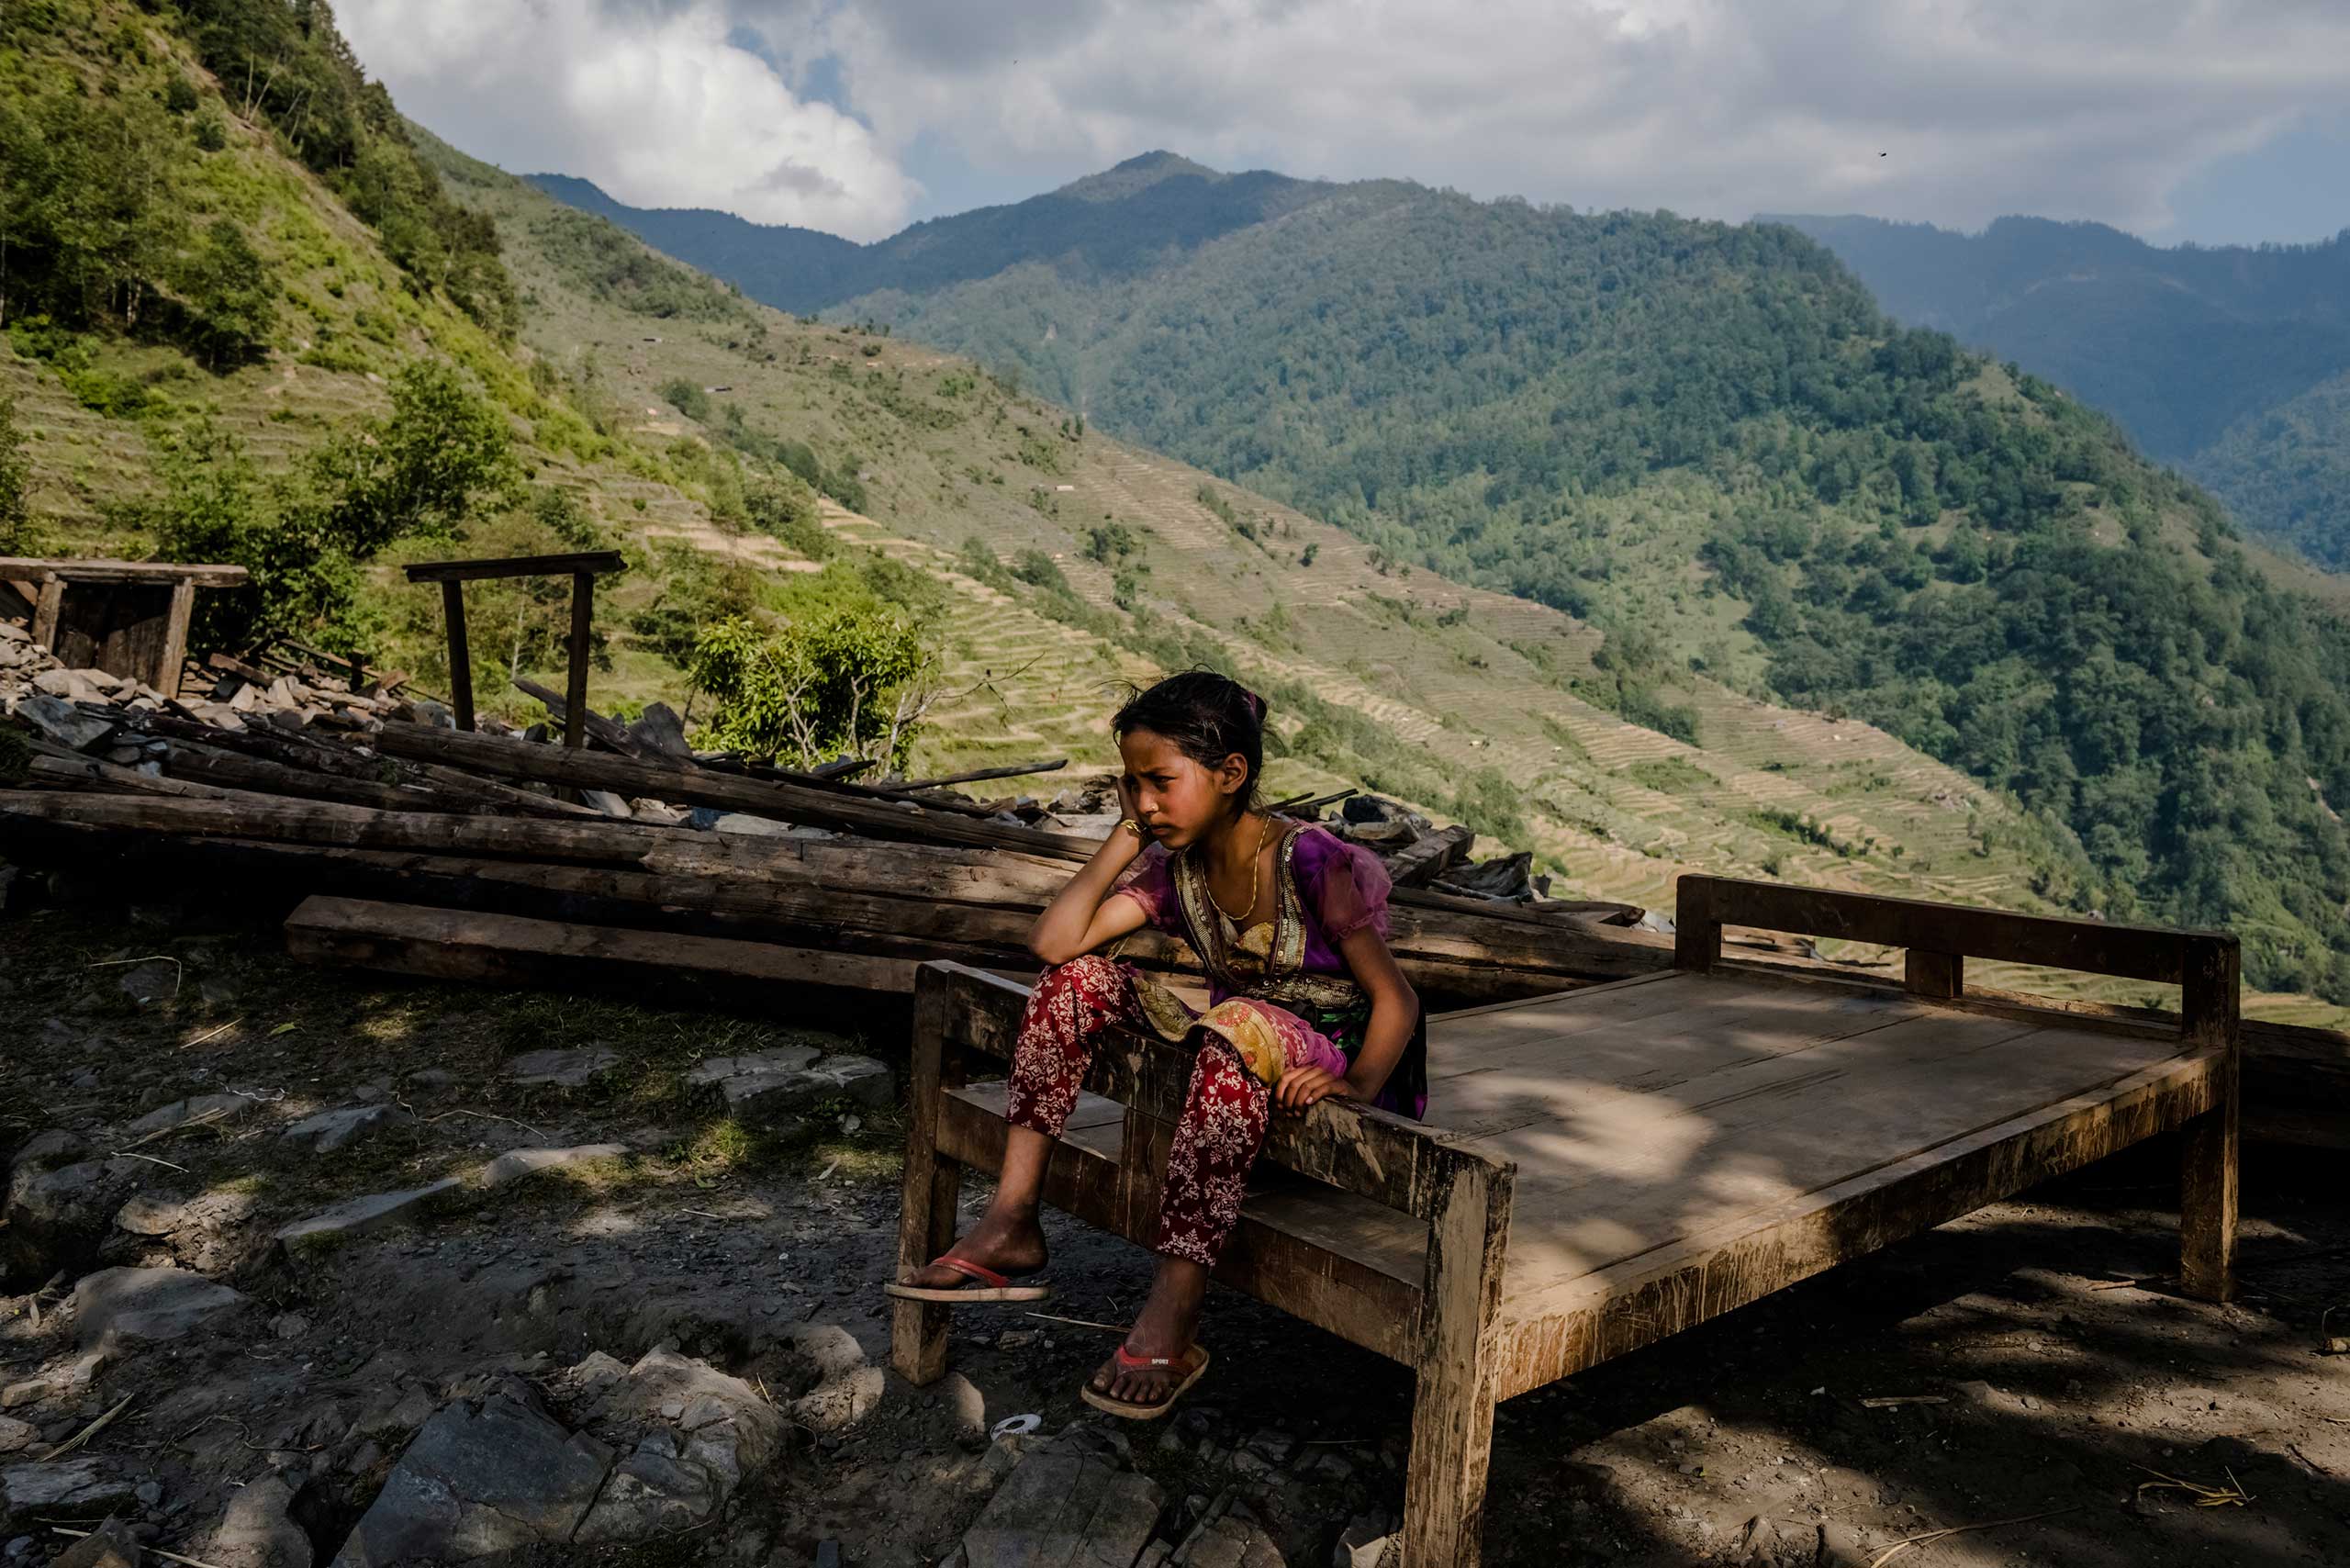 A girl rests on a bed frame salvaged from the ruins of her home in the village of Barpak, Nepal. In the village, the epicenter of the April 25 earthquake and one of the larger villages in the mountainous Gorkha district, 1,200 out of 1,475 houses were destroyed. Local authorities said 69 people were killed, 50 were seriously injured and some were still missing. May 5, 2015.